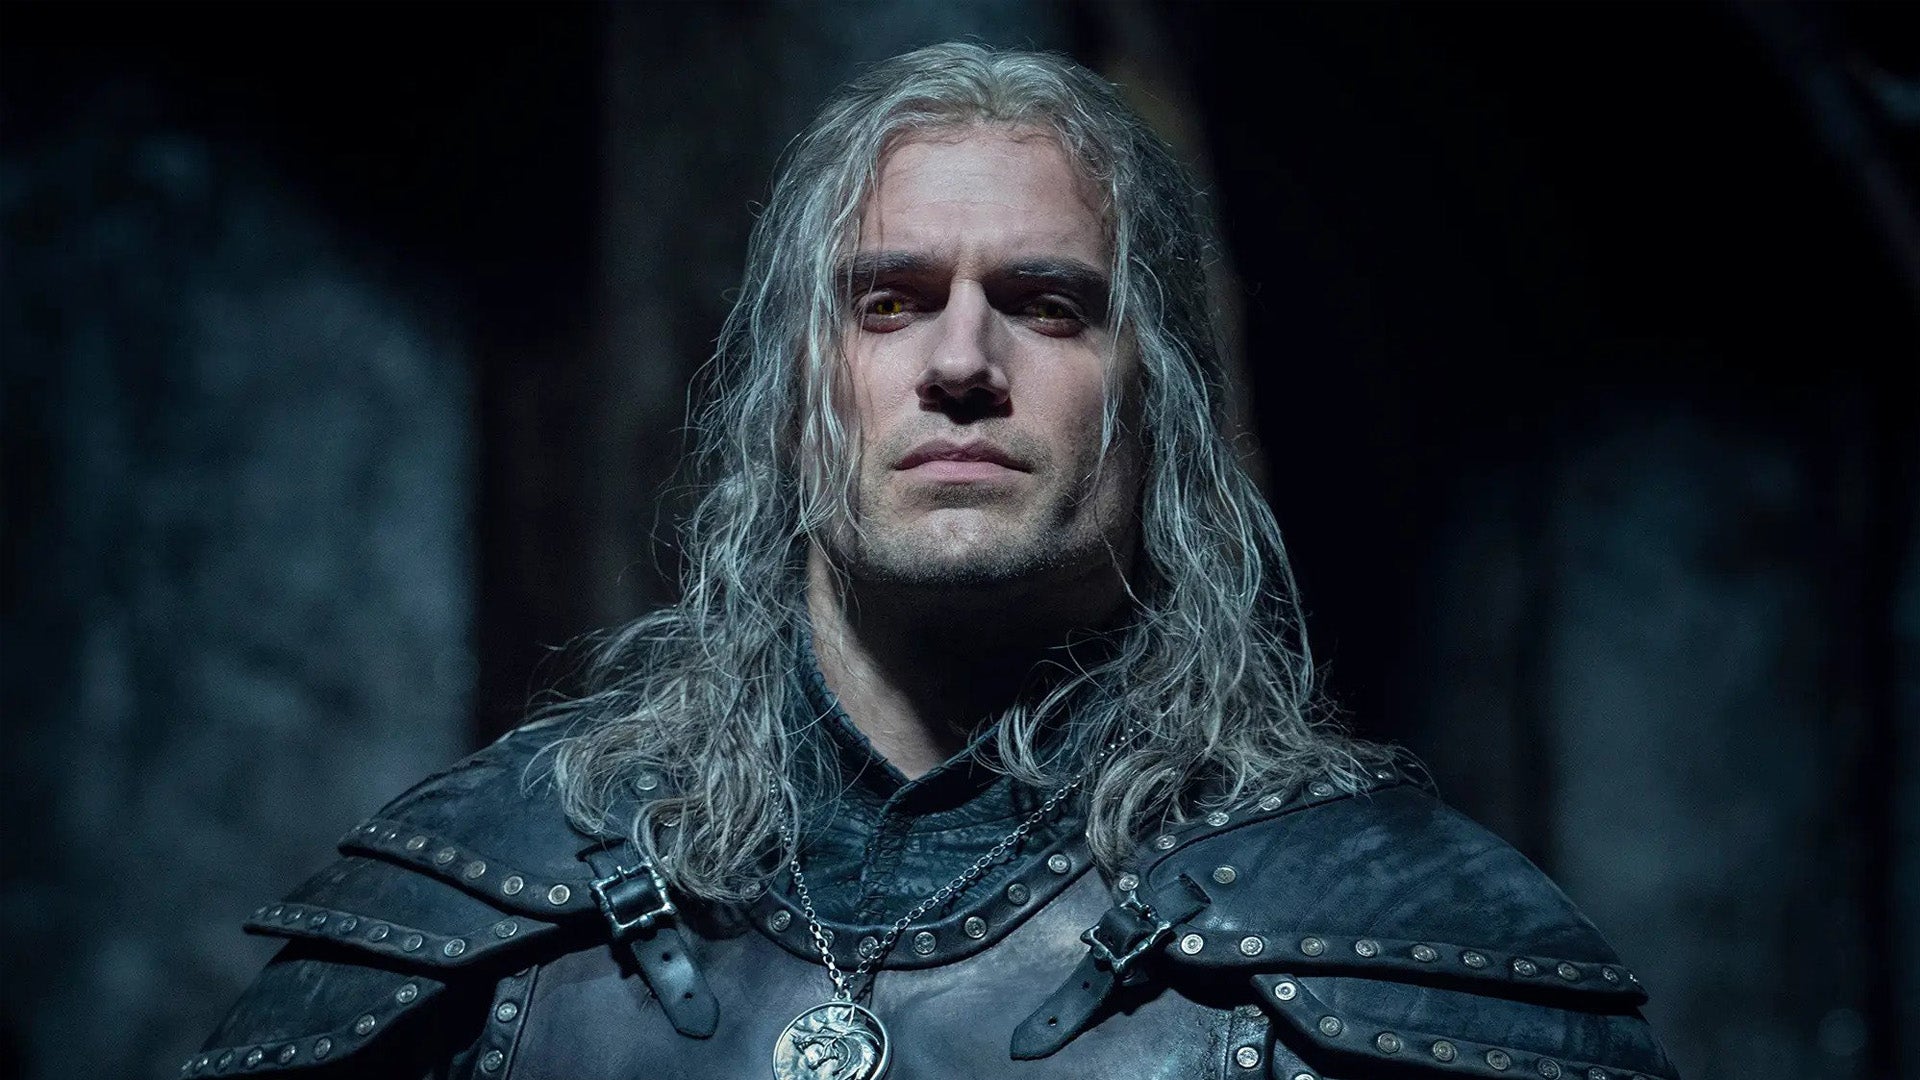 Image for Netflix's The Witcher series says goodbye to Henry Cavill, with Geralt recast for season four